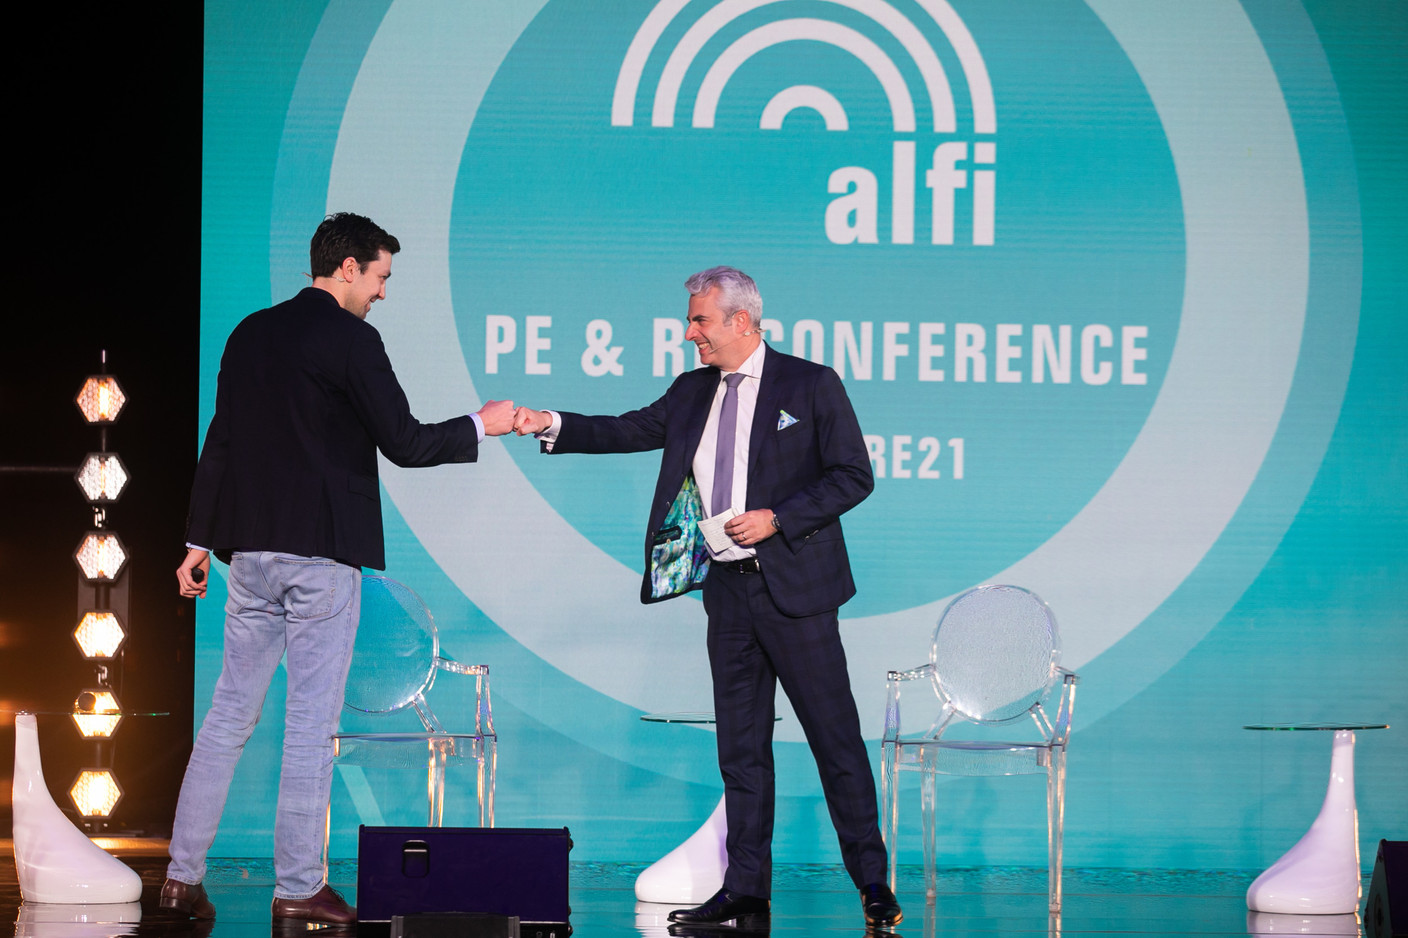 Olivier Coekelbergs, partner at EY and conference day one chairperson, welcomes Jakob Drzazga, founder and CEO of ScalingFunds, to the stage during Alfi’s PE & RE conference, 30 November 2021. Photo: Matic Zorman